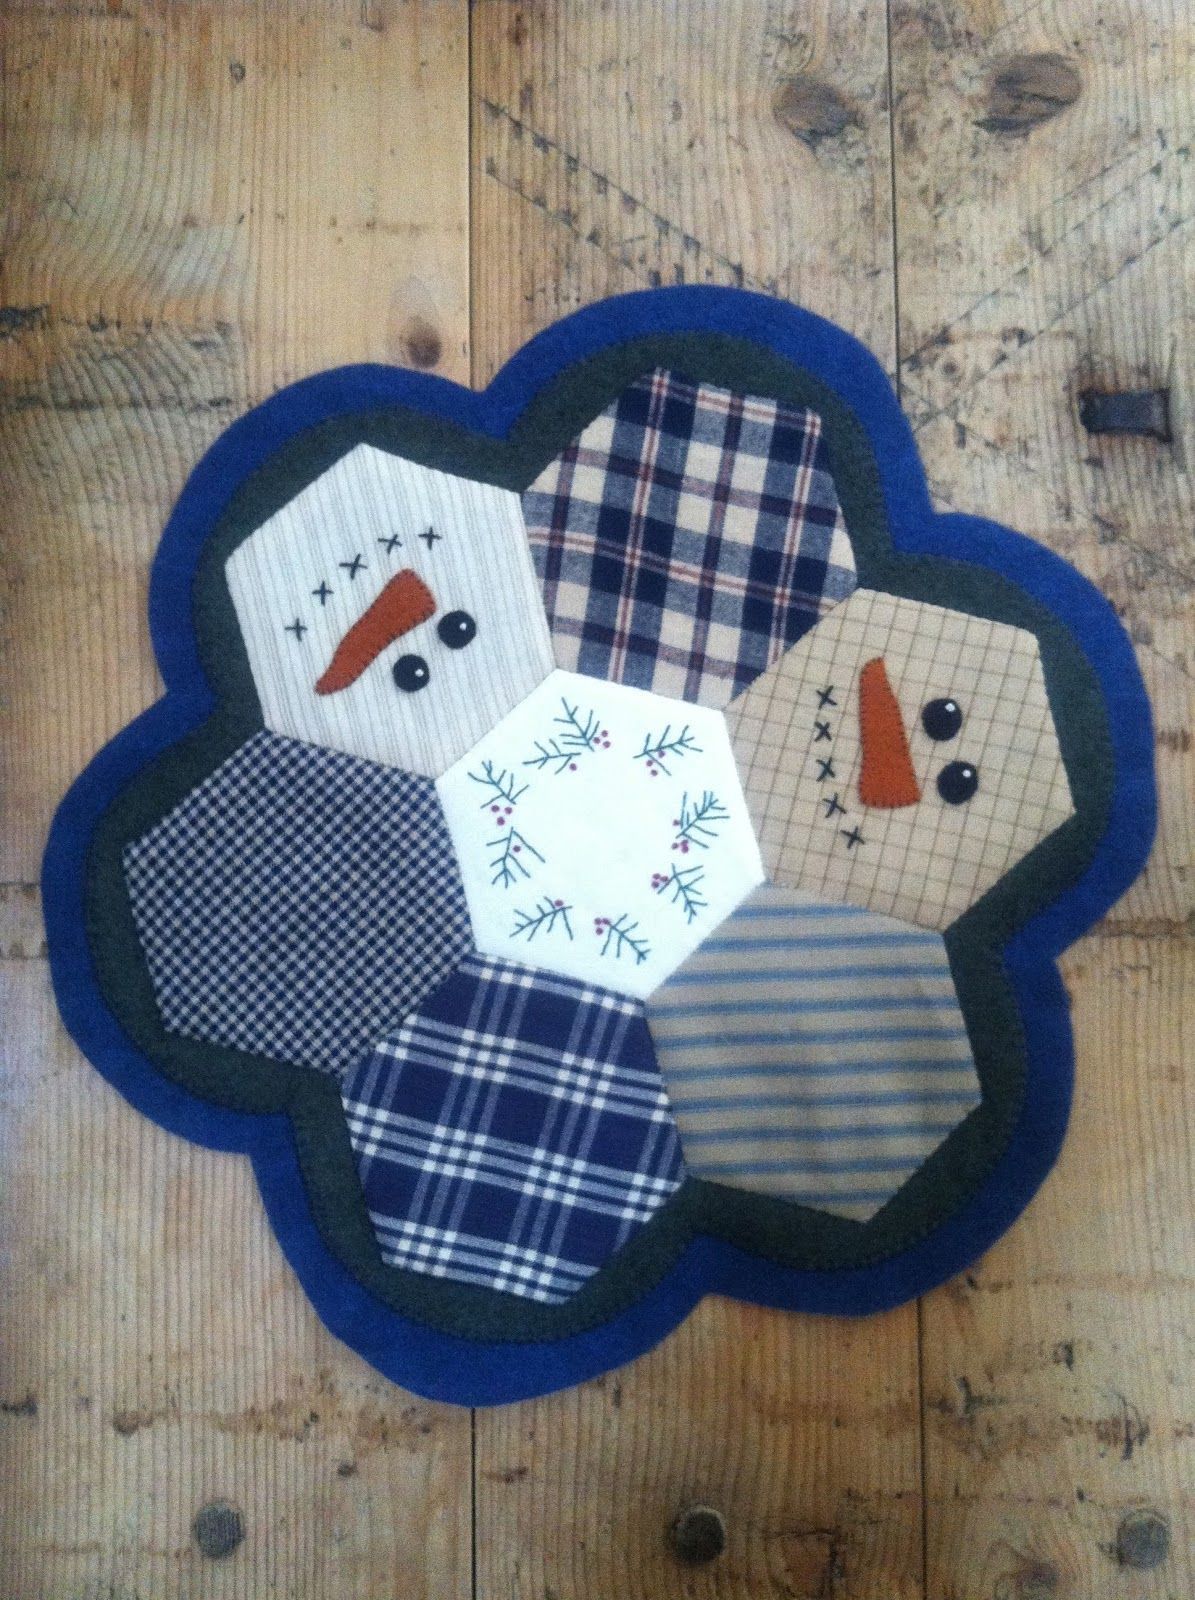 This is so dang cute! And, Hen & Chicks Studio can teach you to stitch hexagons.